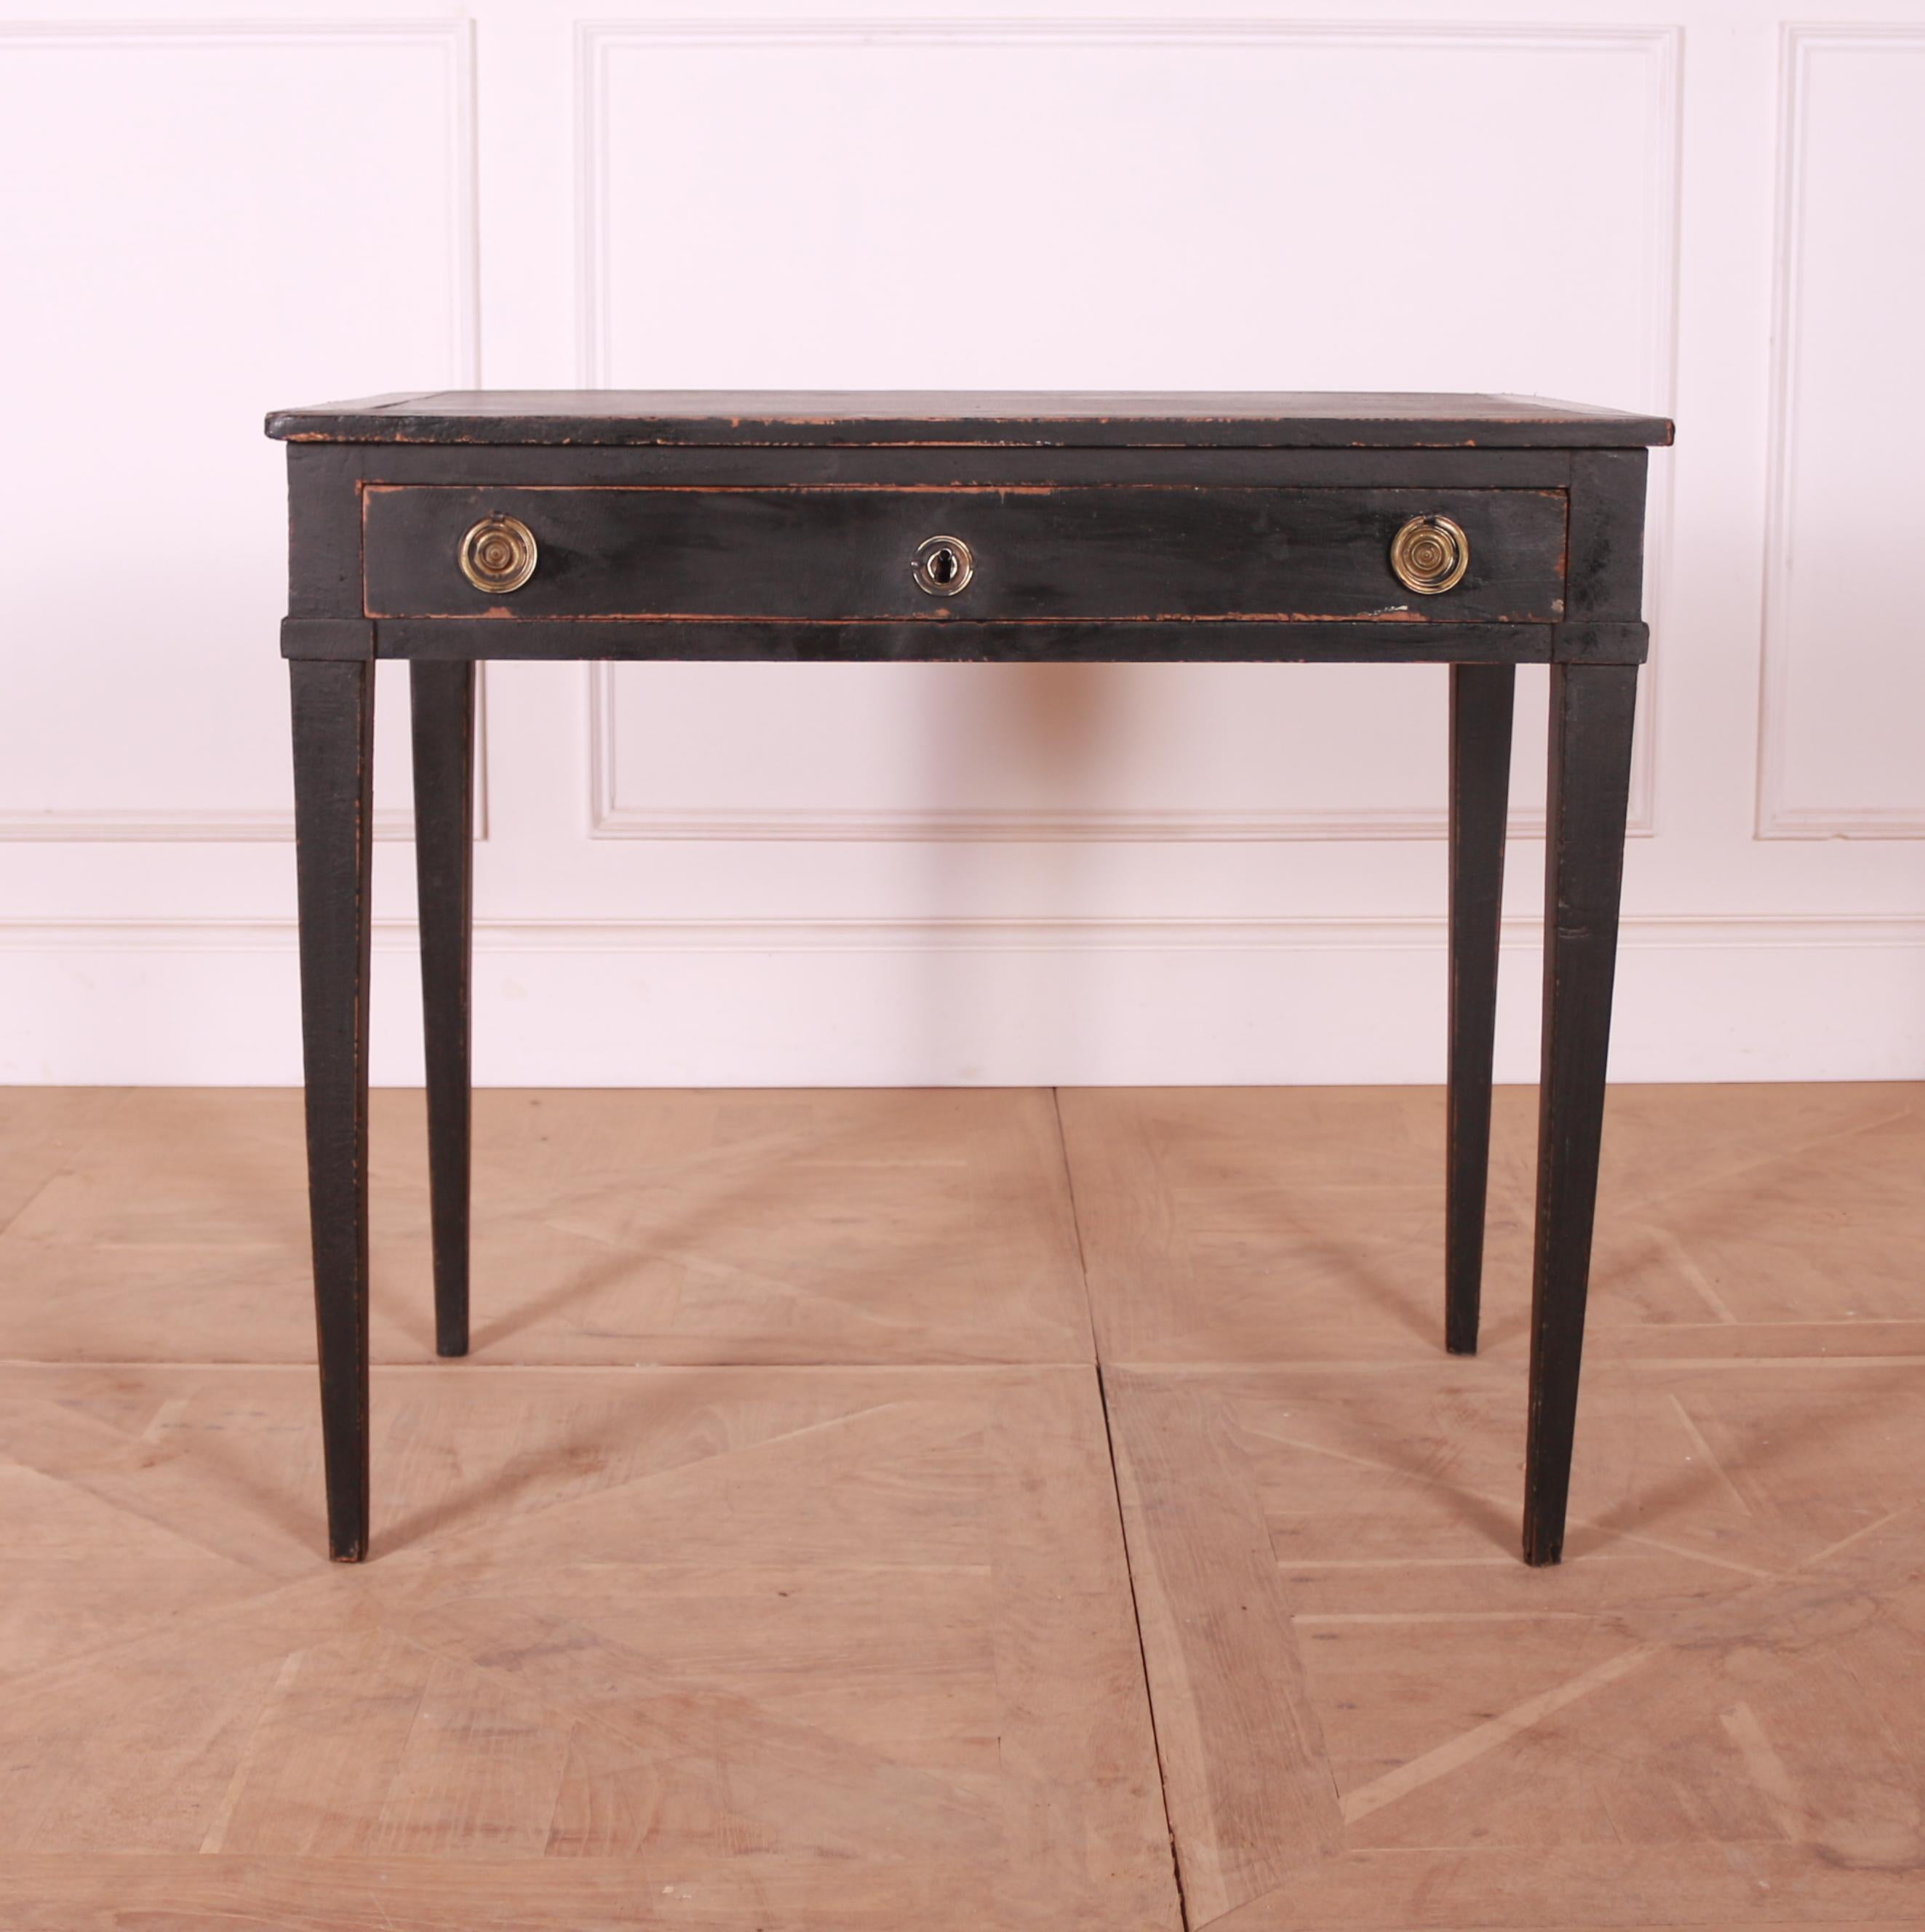 Early 19th century French painted oak lamp table. 1830.

Height to apron is 22.5